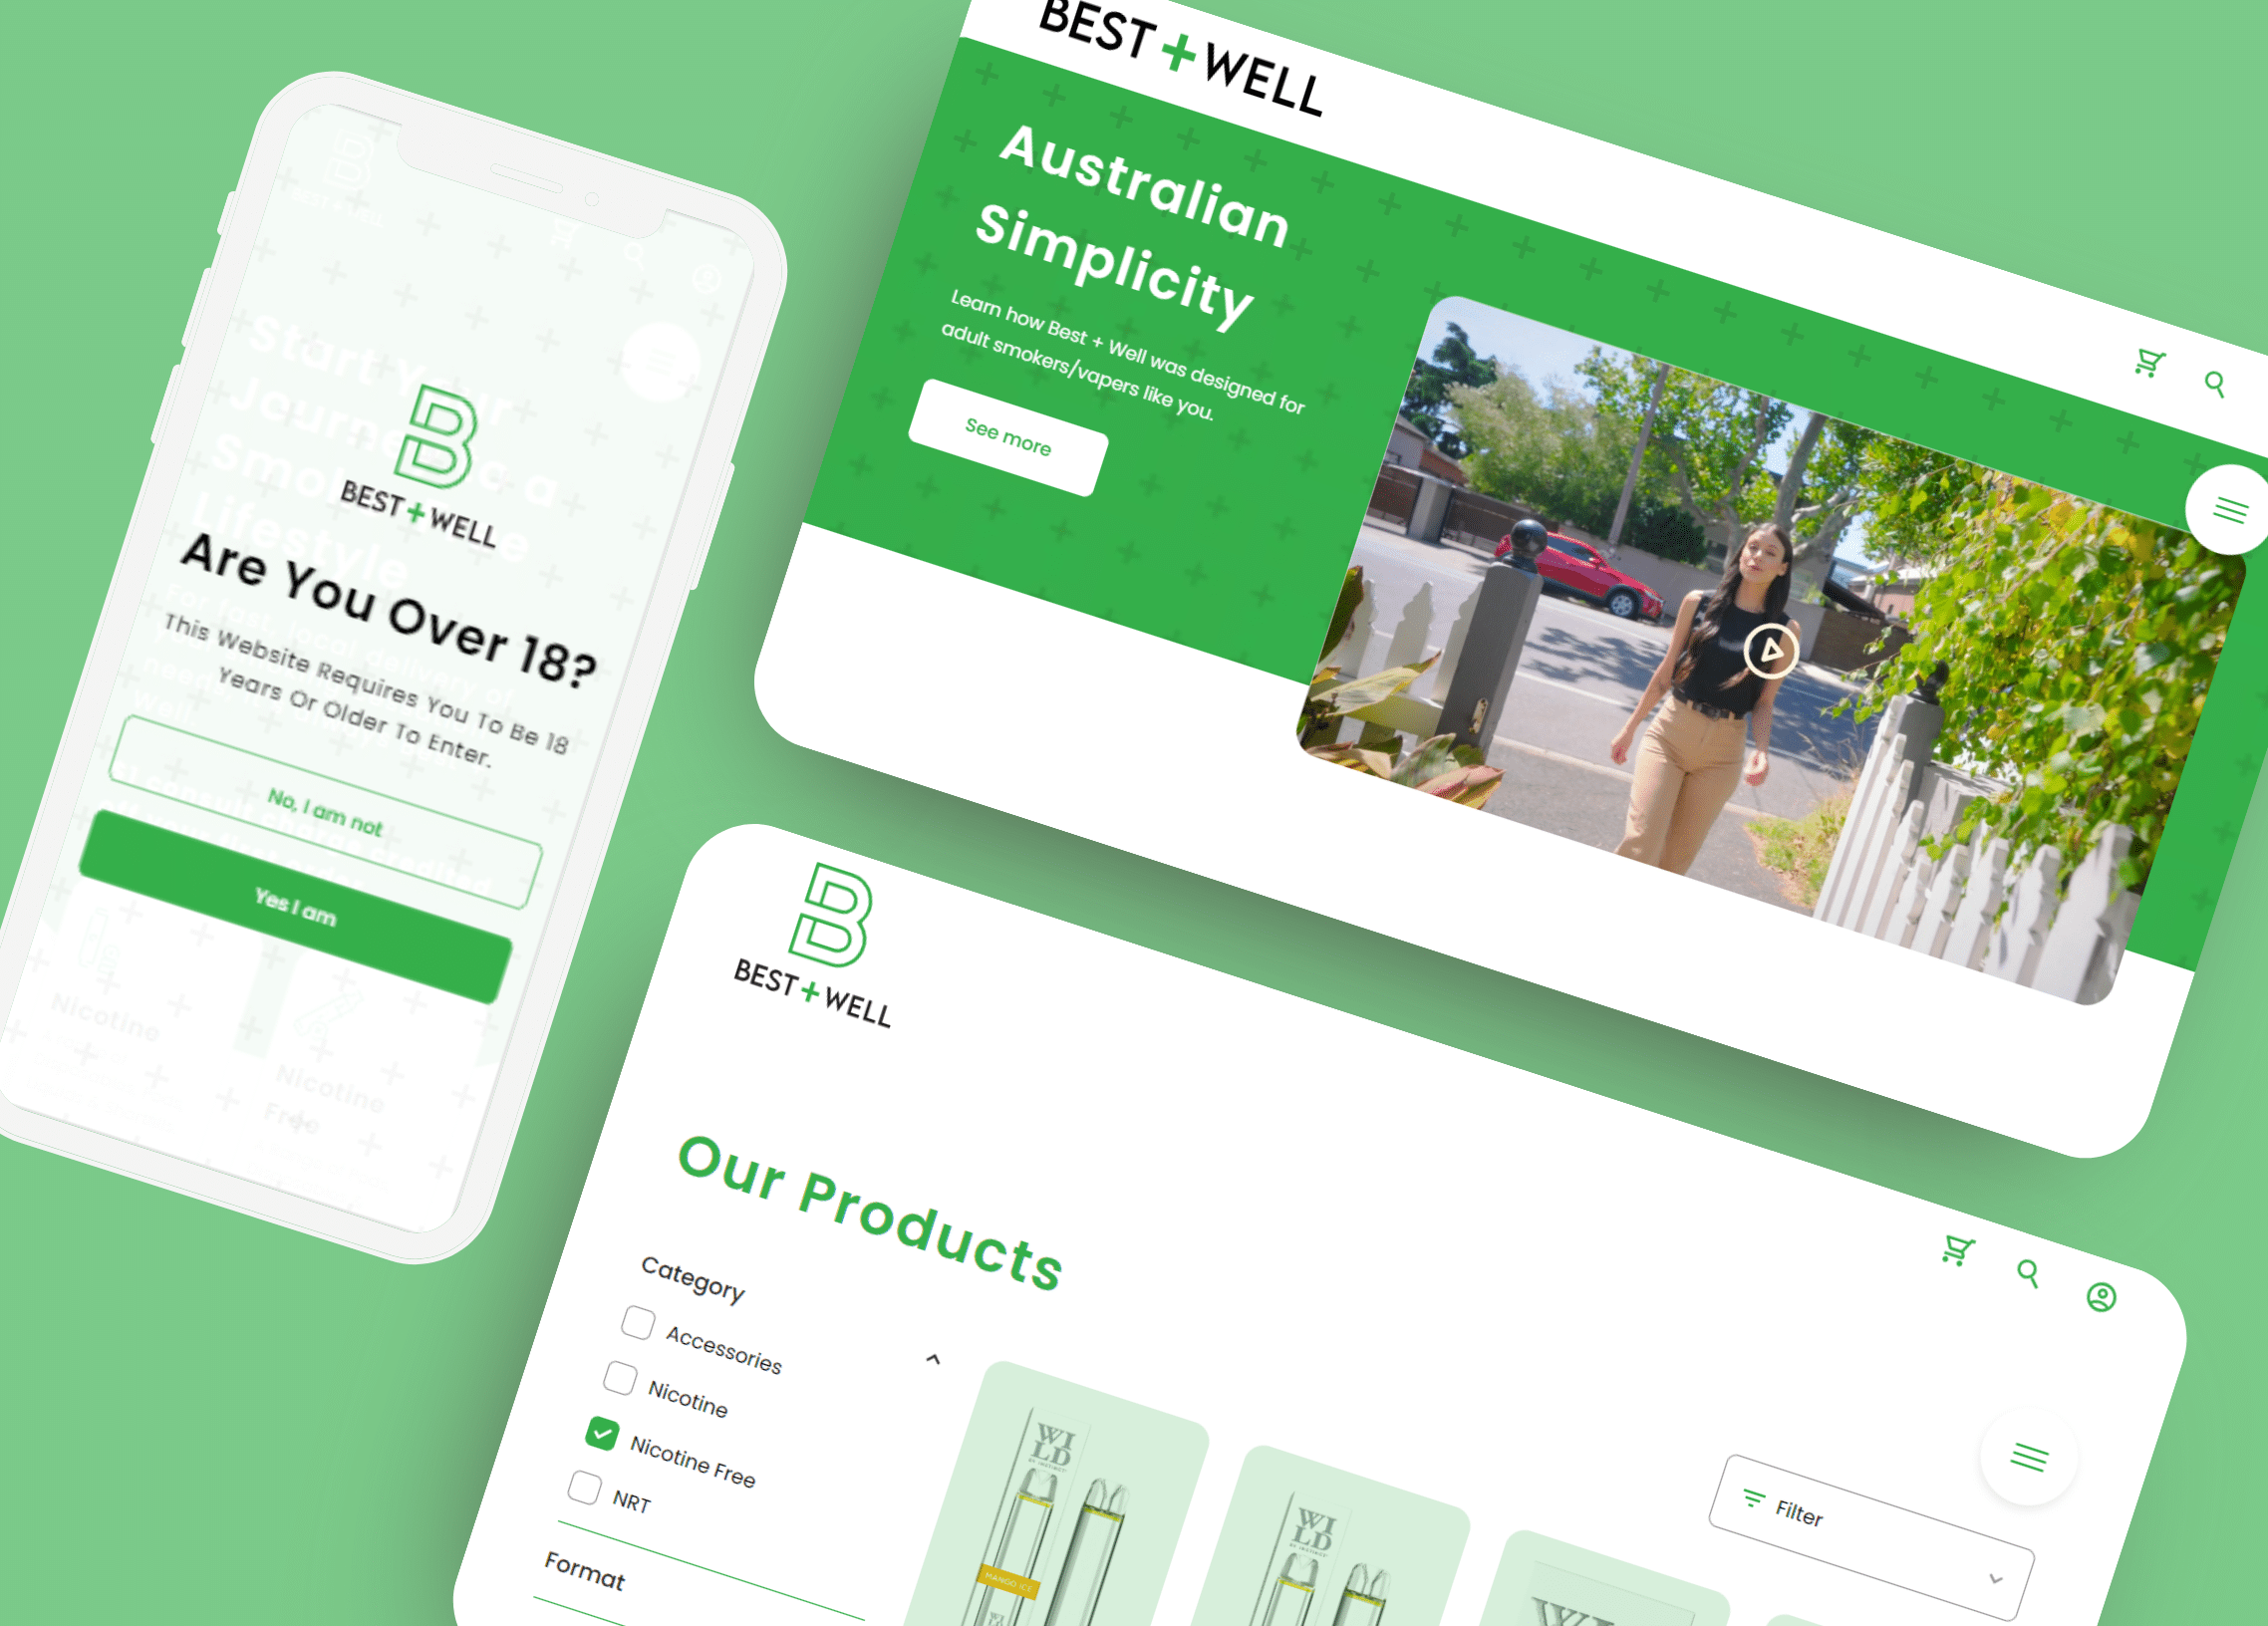 Best and Well – Revolutionizing Online Pharmacy for Smokers